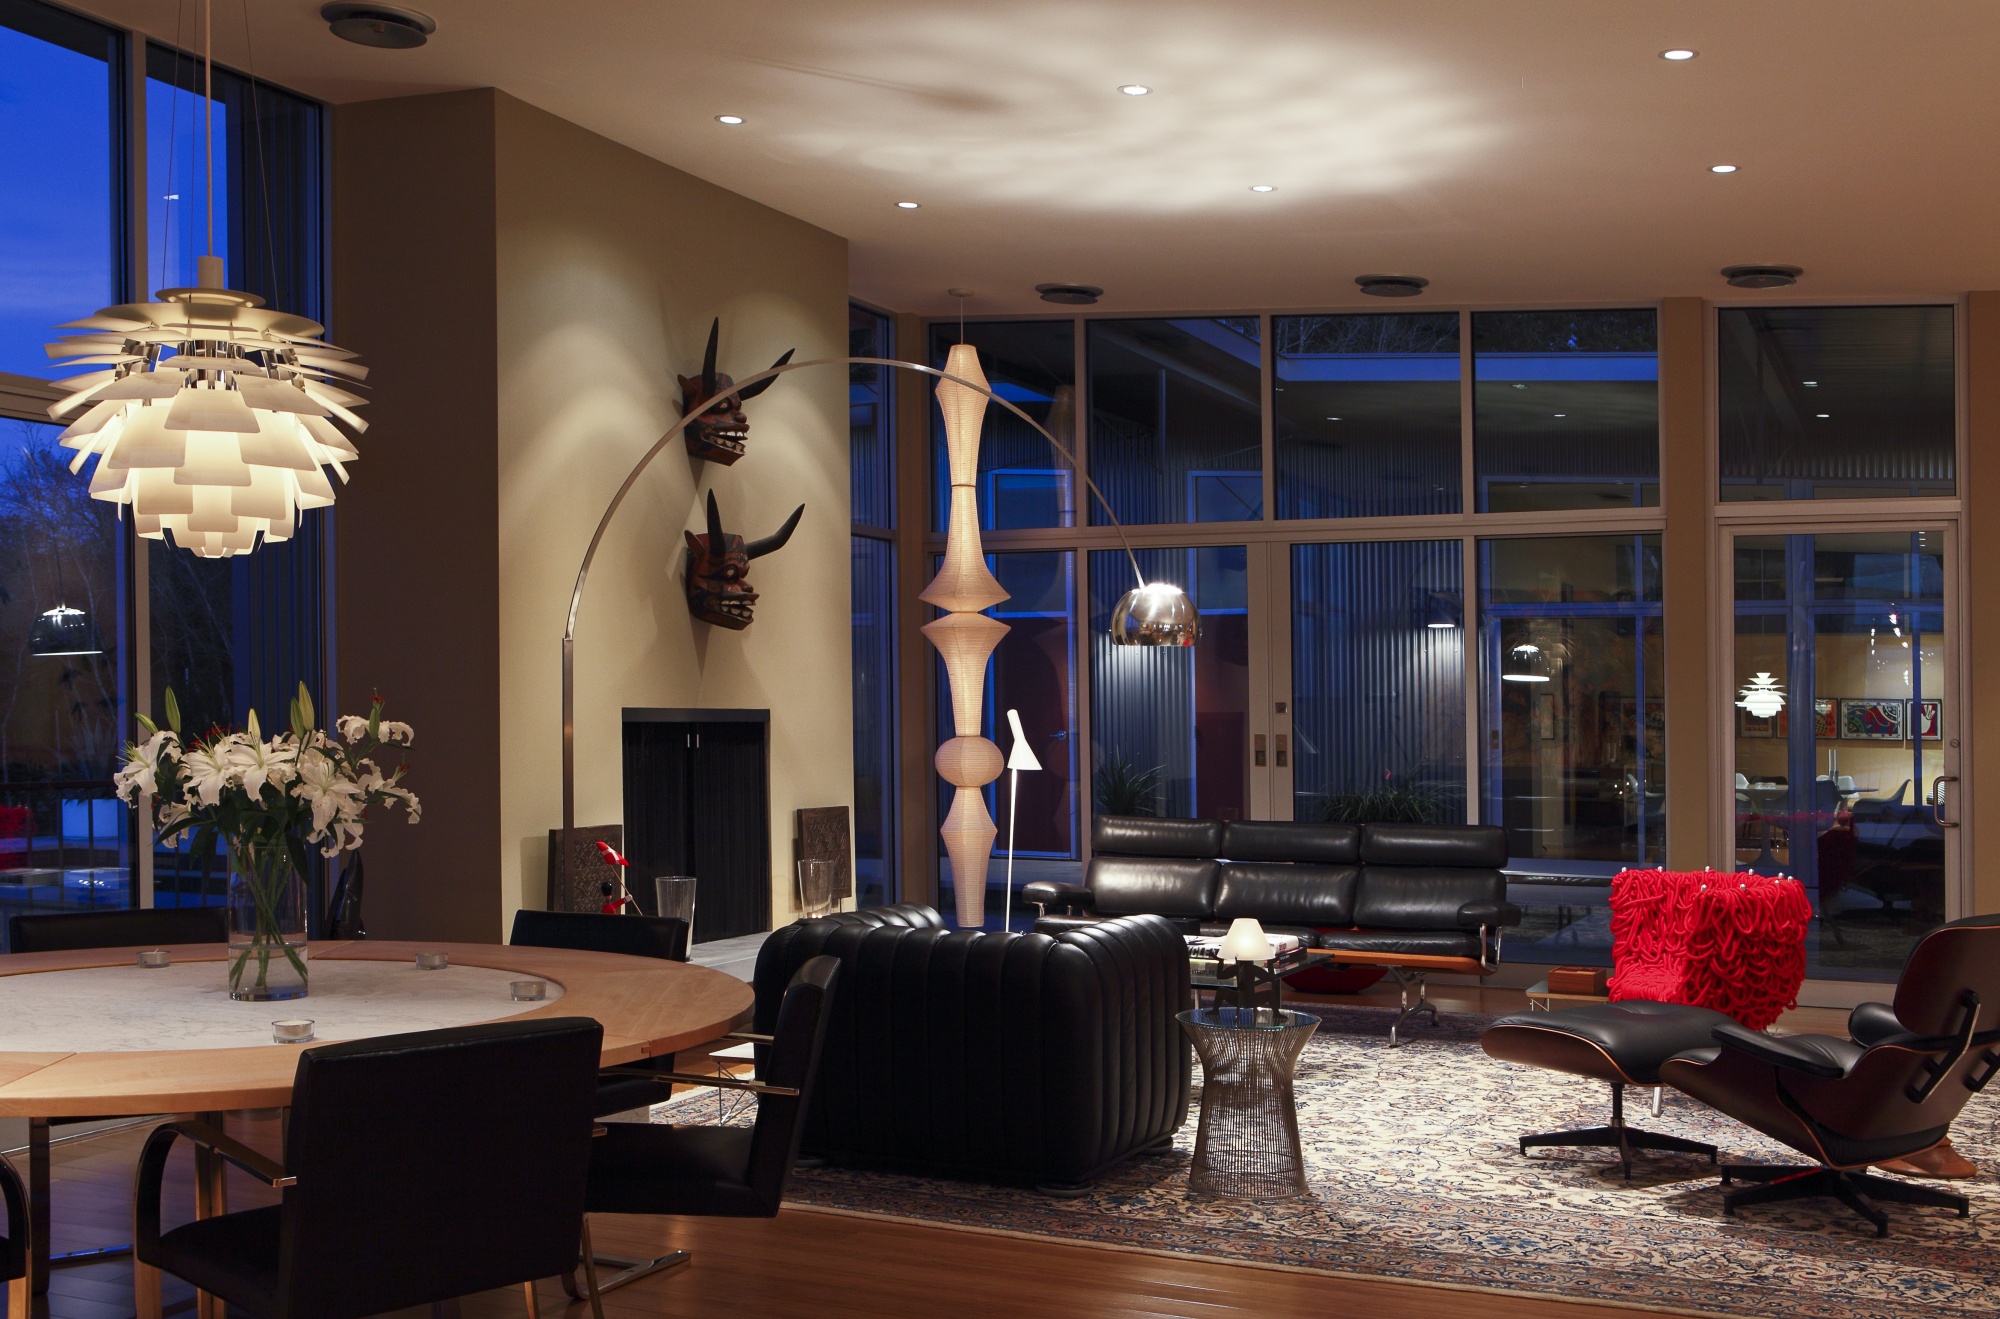 Low voltage lighting creates a warmth at night for lounging.